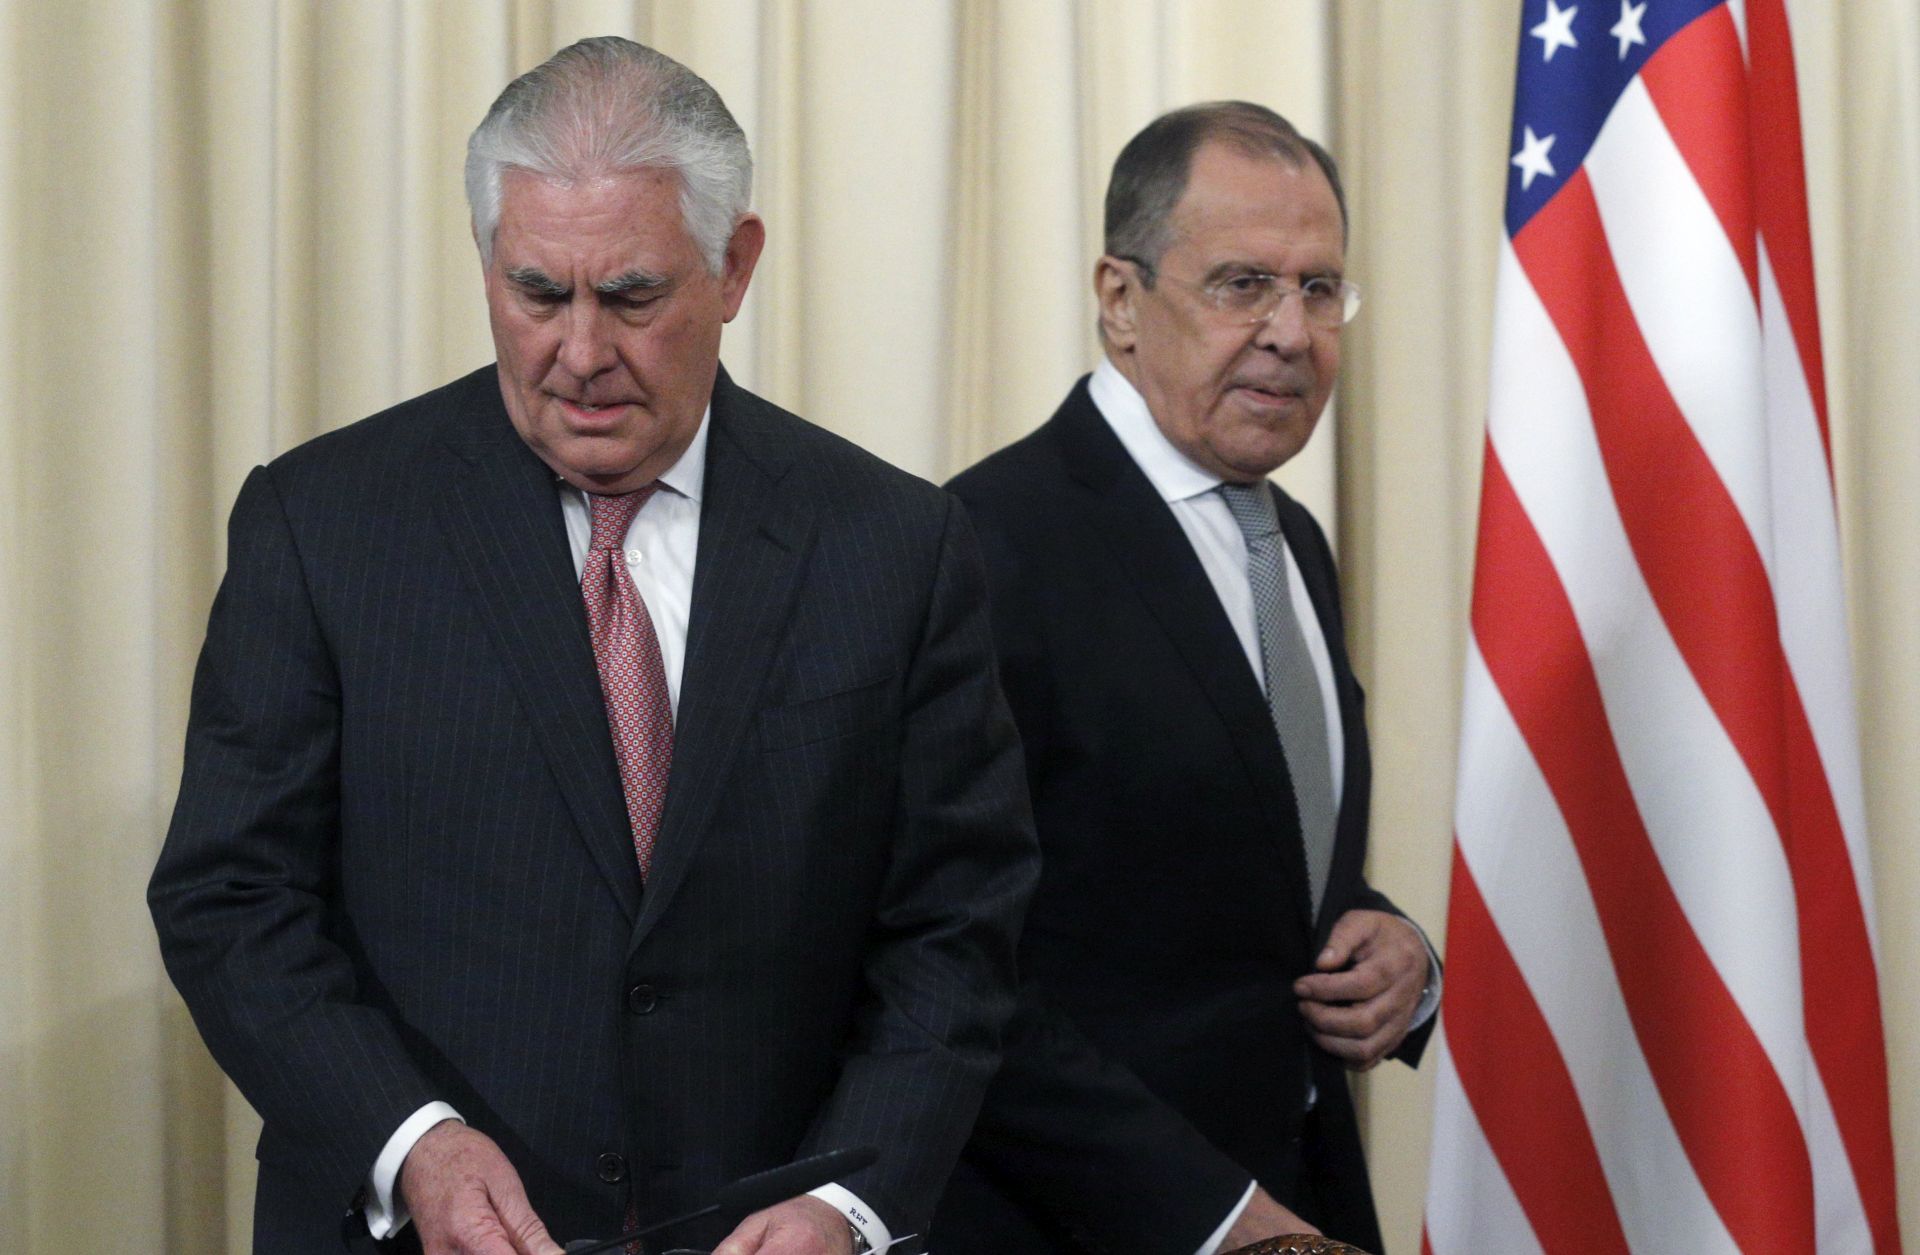 epa05904777 Russian Foreign Minister Sergei Lavrov (R) and US Secretary of State Rex Tillerson (L) arrive for a news conference in the Russian Foreign Ministry guest house in Moscow, Russia, 12 April 2017. Tillerson is in Moscow, meeting with Russian Foreign Minister Sergei Lavrov and other Russian officials to discuss Ukraine, counterterrorism efforts, bilateral relations and other issues, including the North Korea (D.P.R.K.) and Syria.  EPA/SERGEI CHIRIKOV